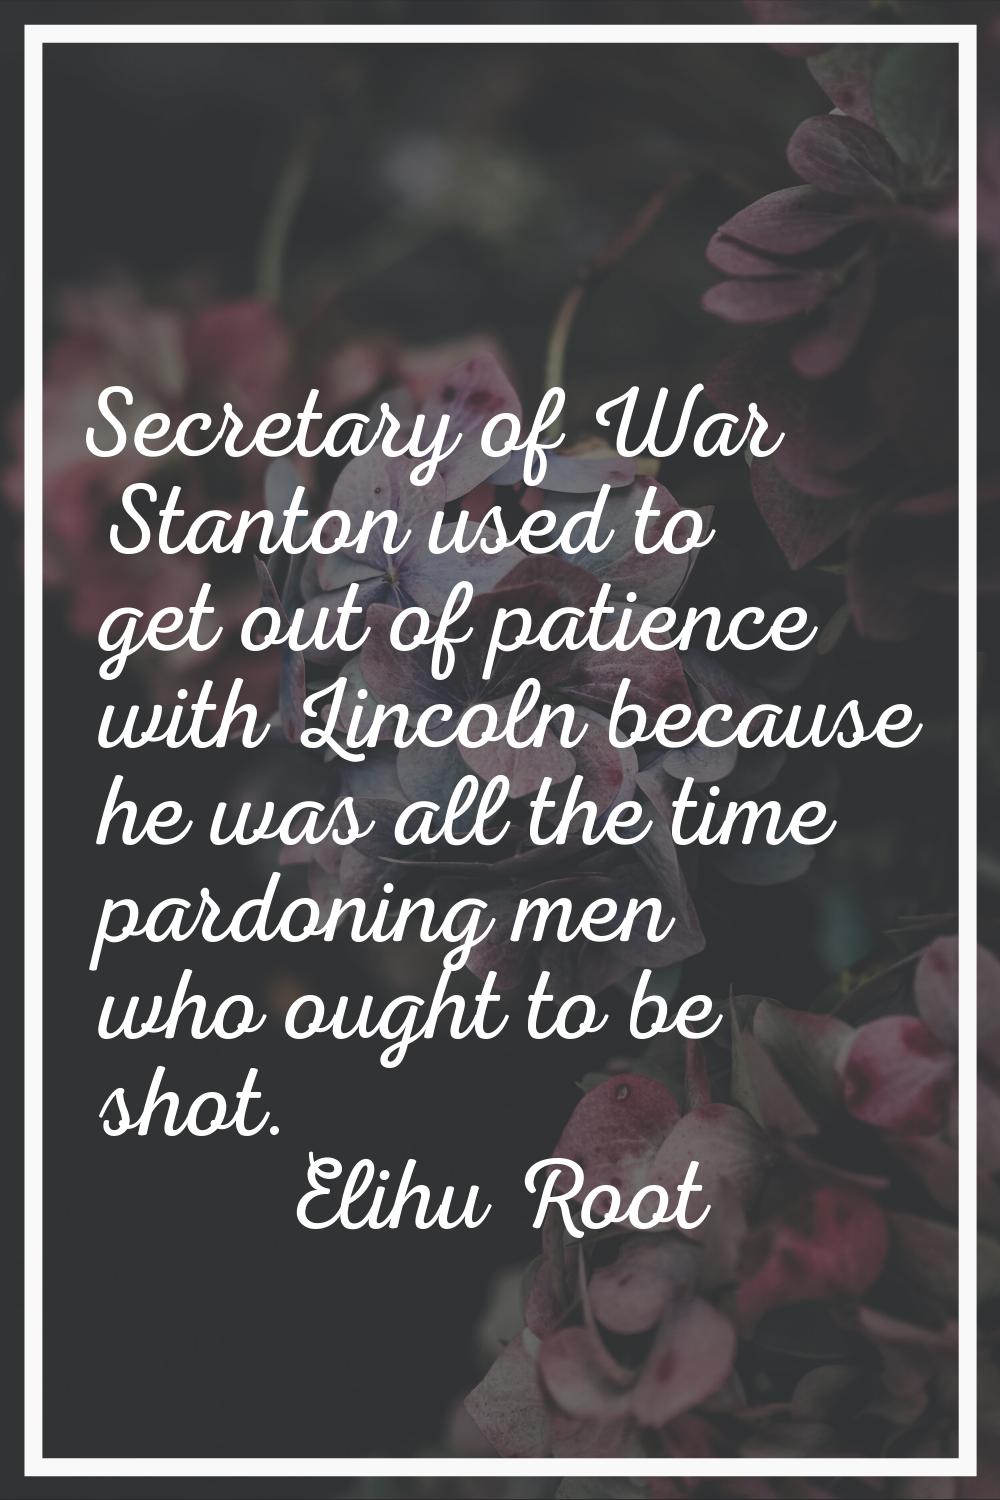 Secretary of War Stanton used to get out of patience with Lincoln because he was all the time pardo